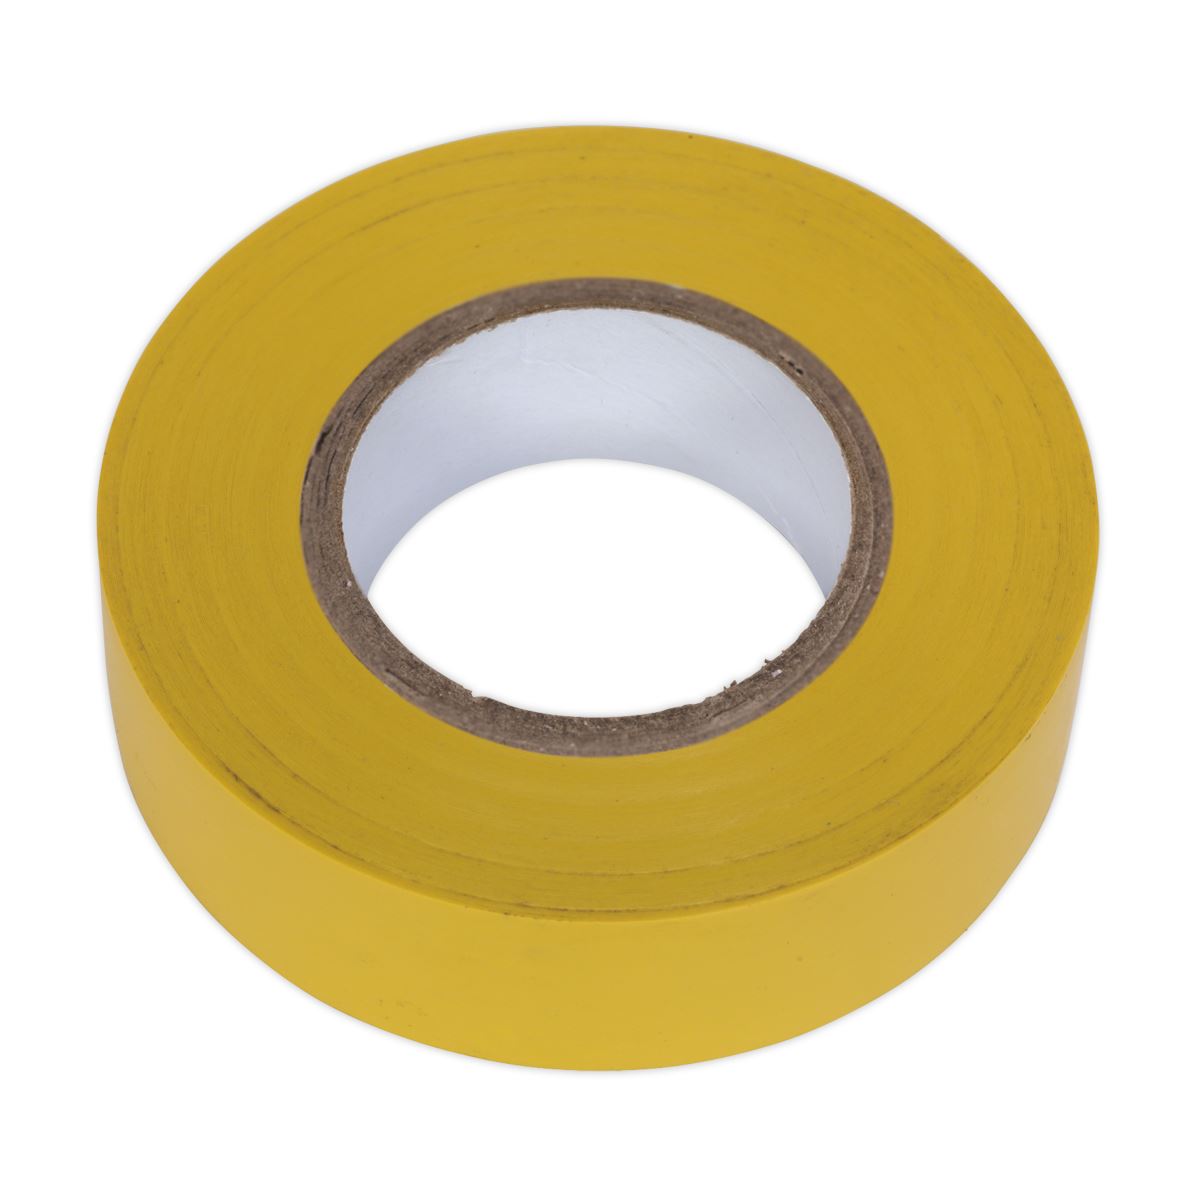 Sealey PVC Insulating Tape 19mm x 20m Yellow Pack of 10